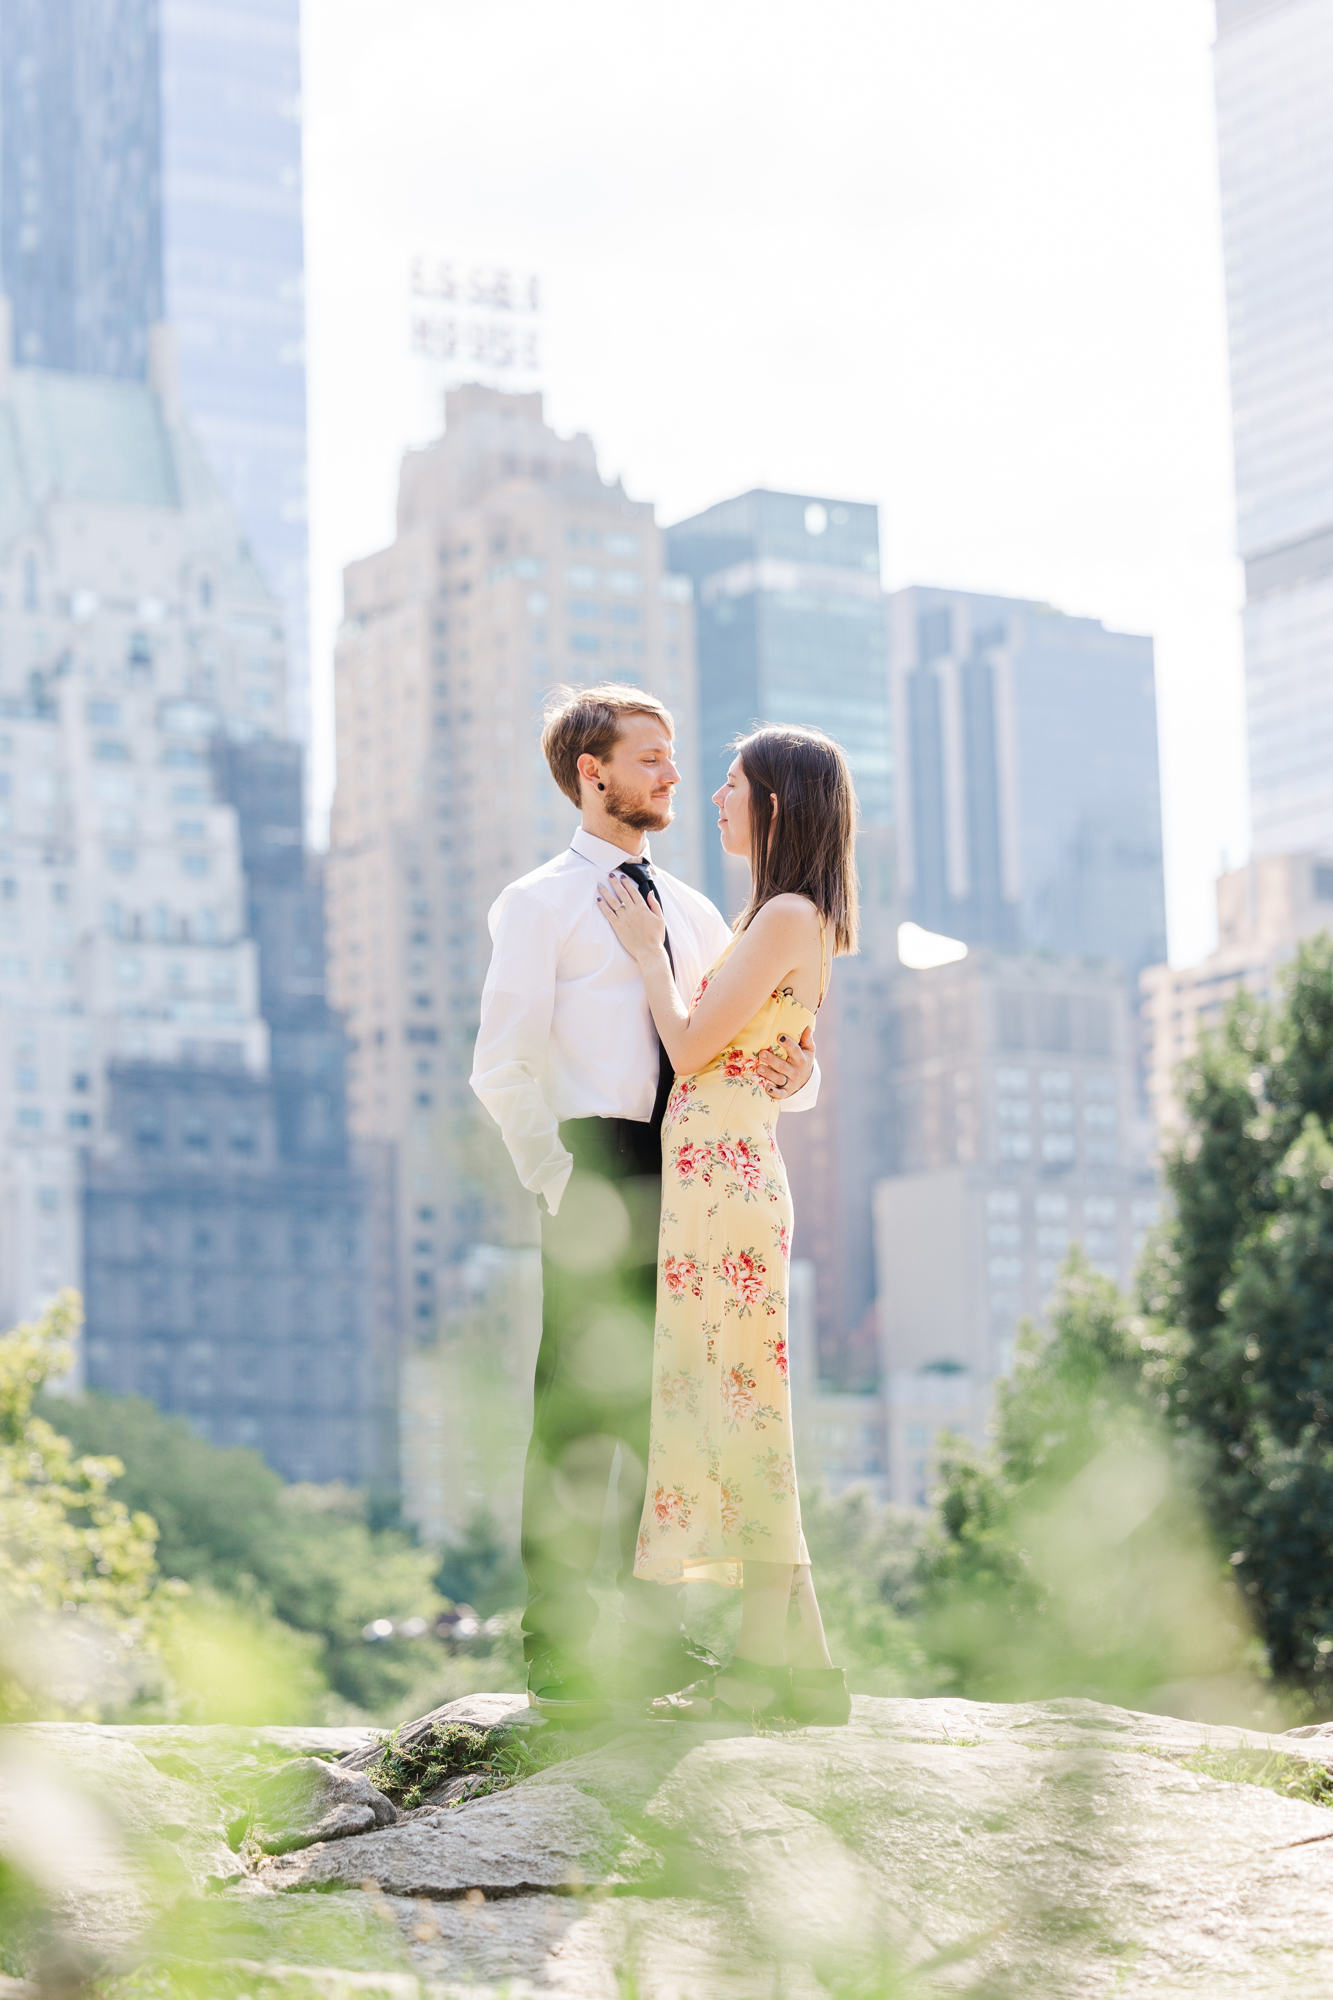 Beautiful Central Park Elopement in the Summertime